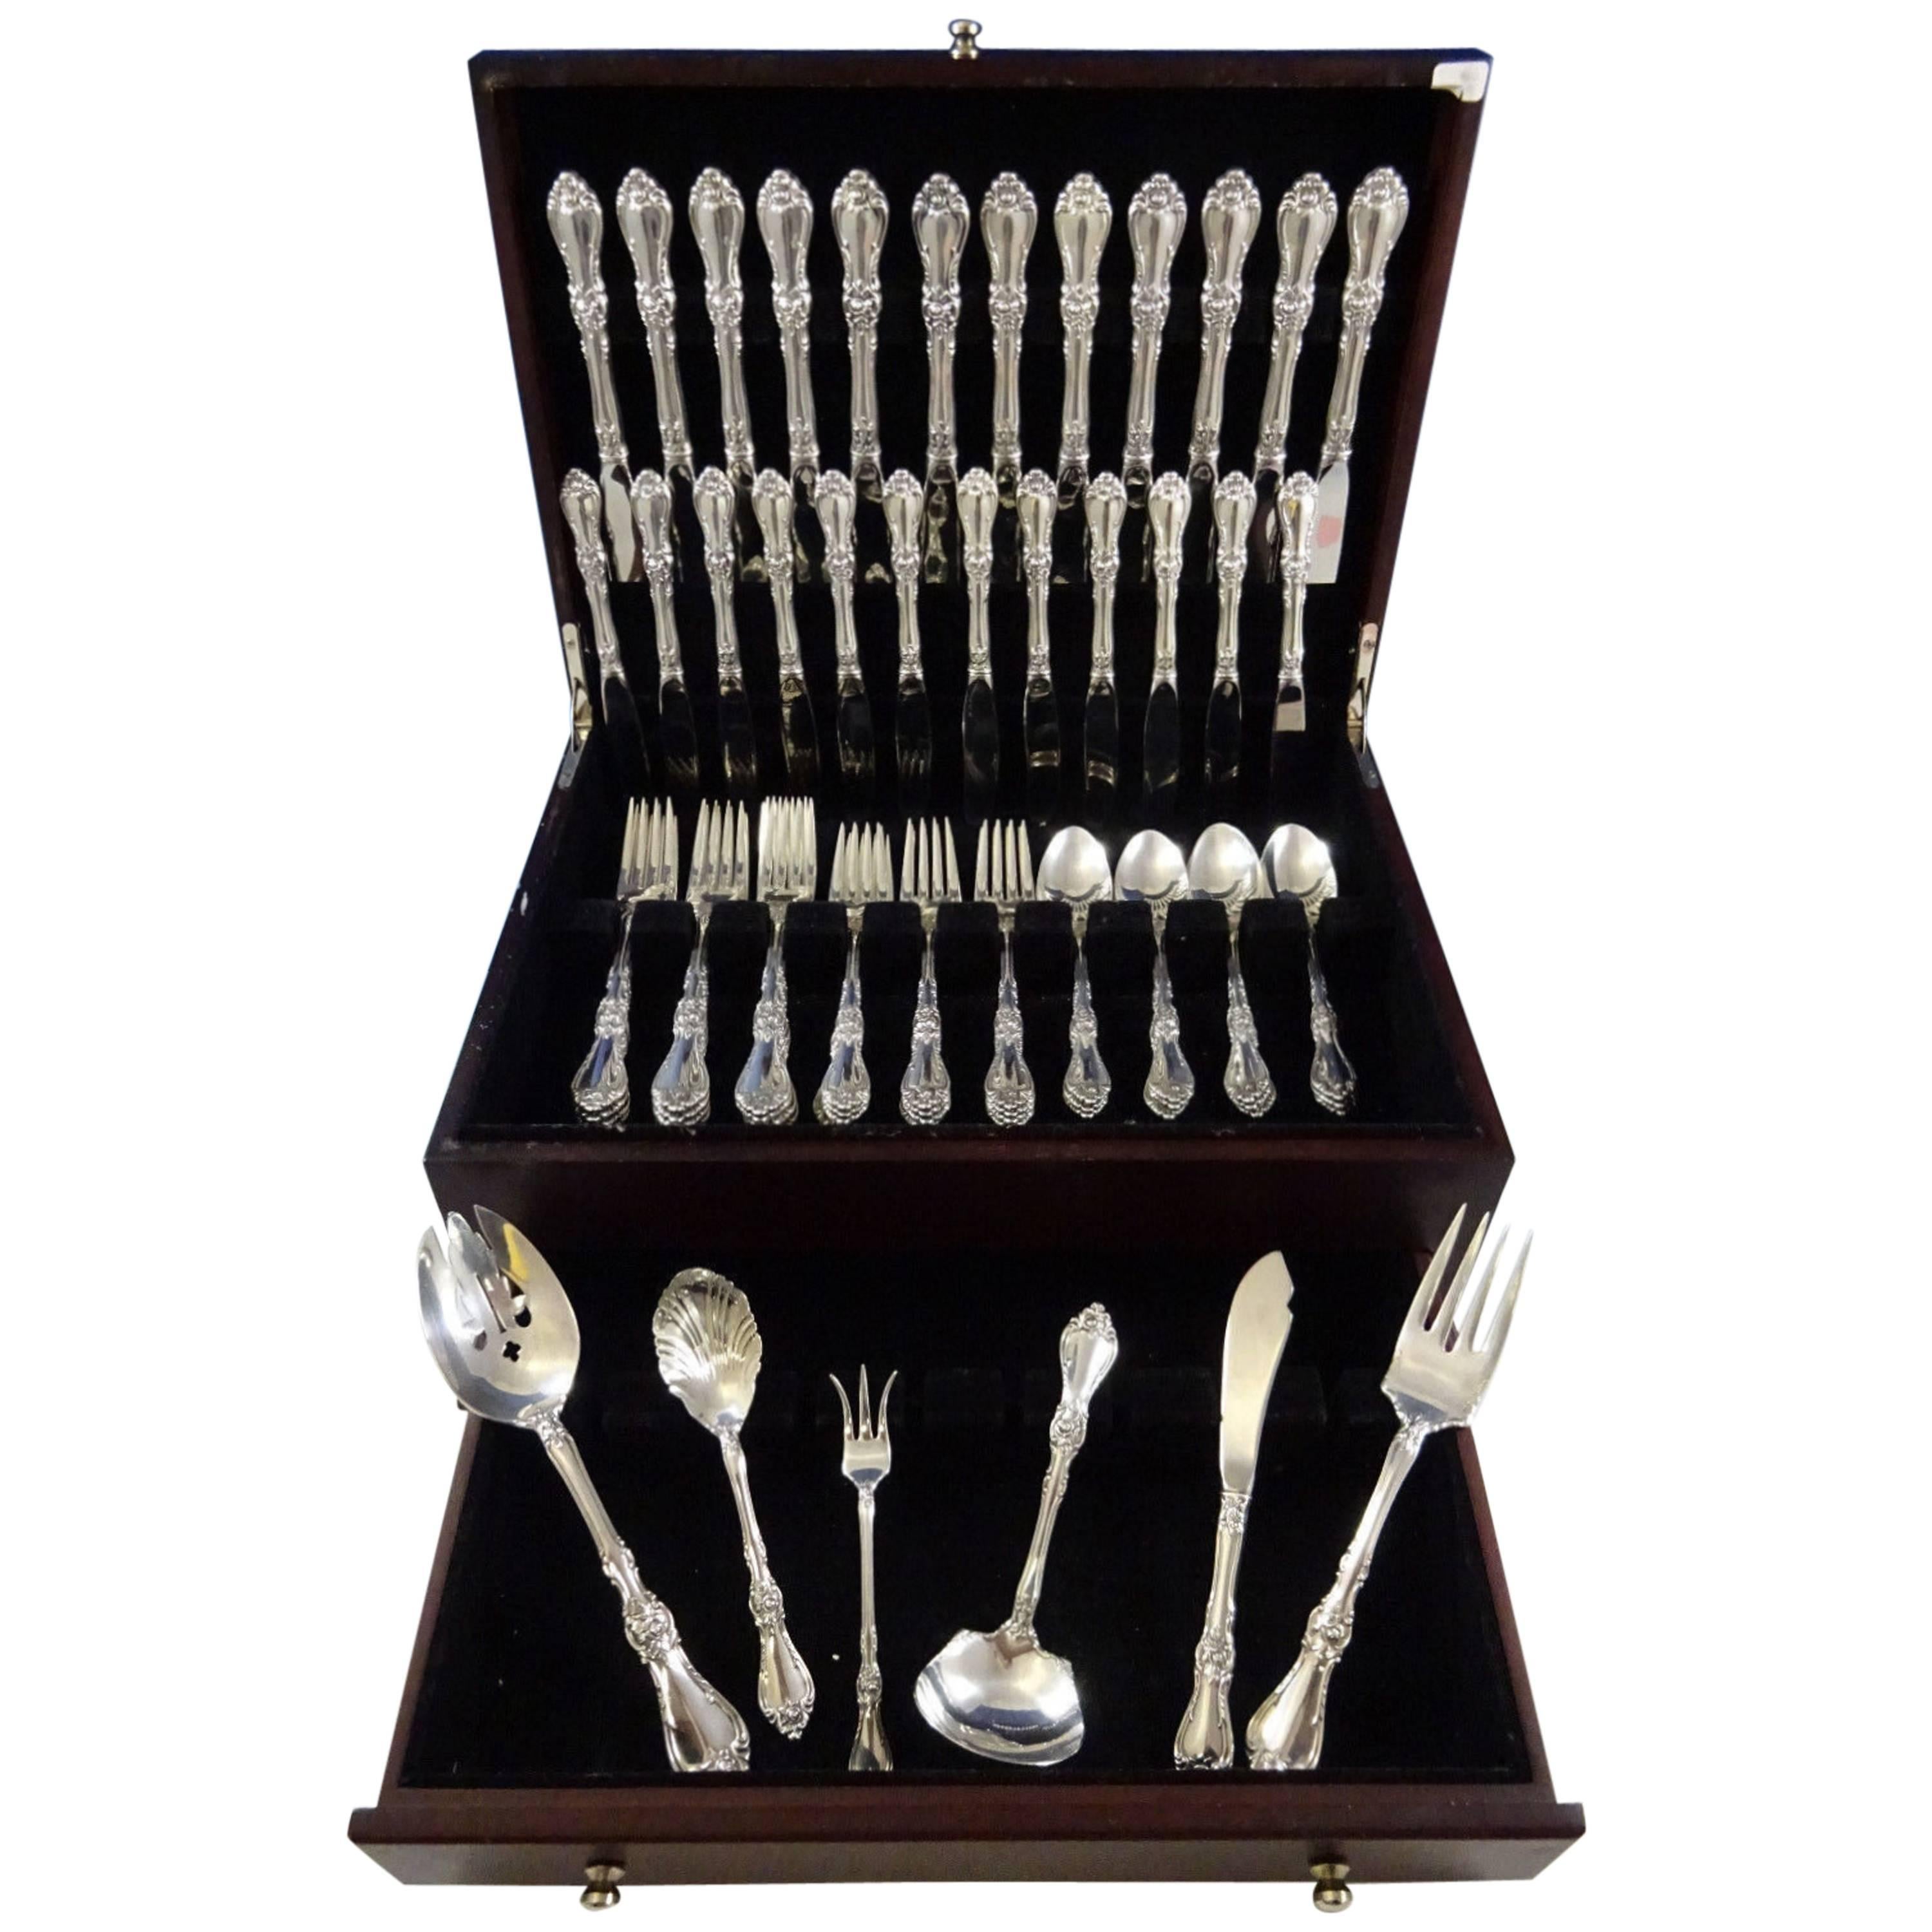 Beautiful royal rose by Wallace sterling silver flatware set of 67 pieces. This set includes: 

12 knives, 9